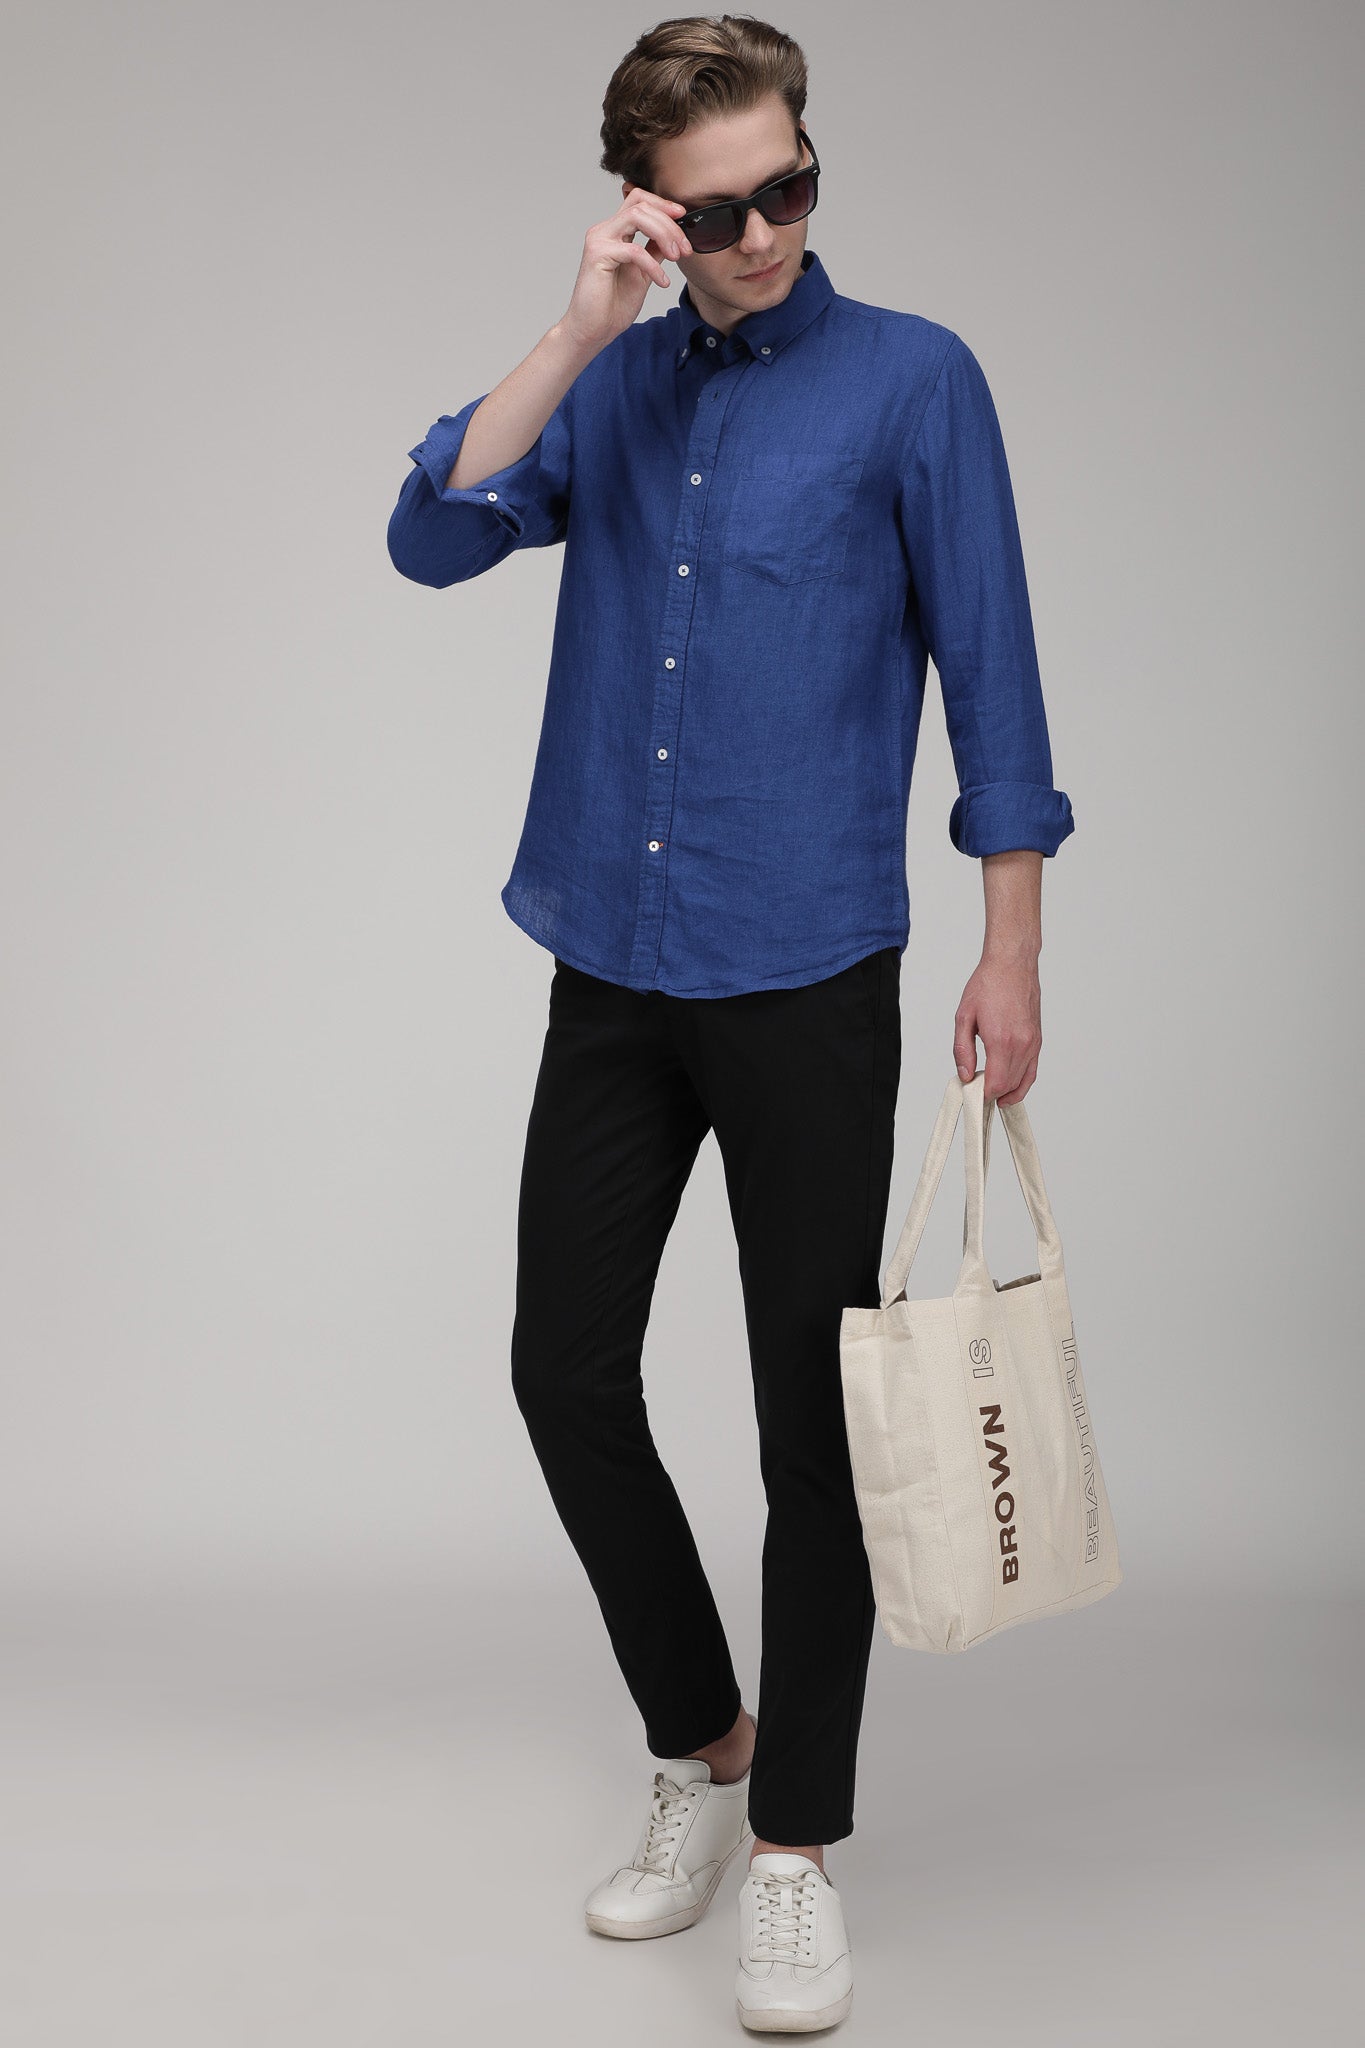 Bare Brown Linen Shirt, Slim Fit with Full Sleeves - Blue